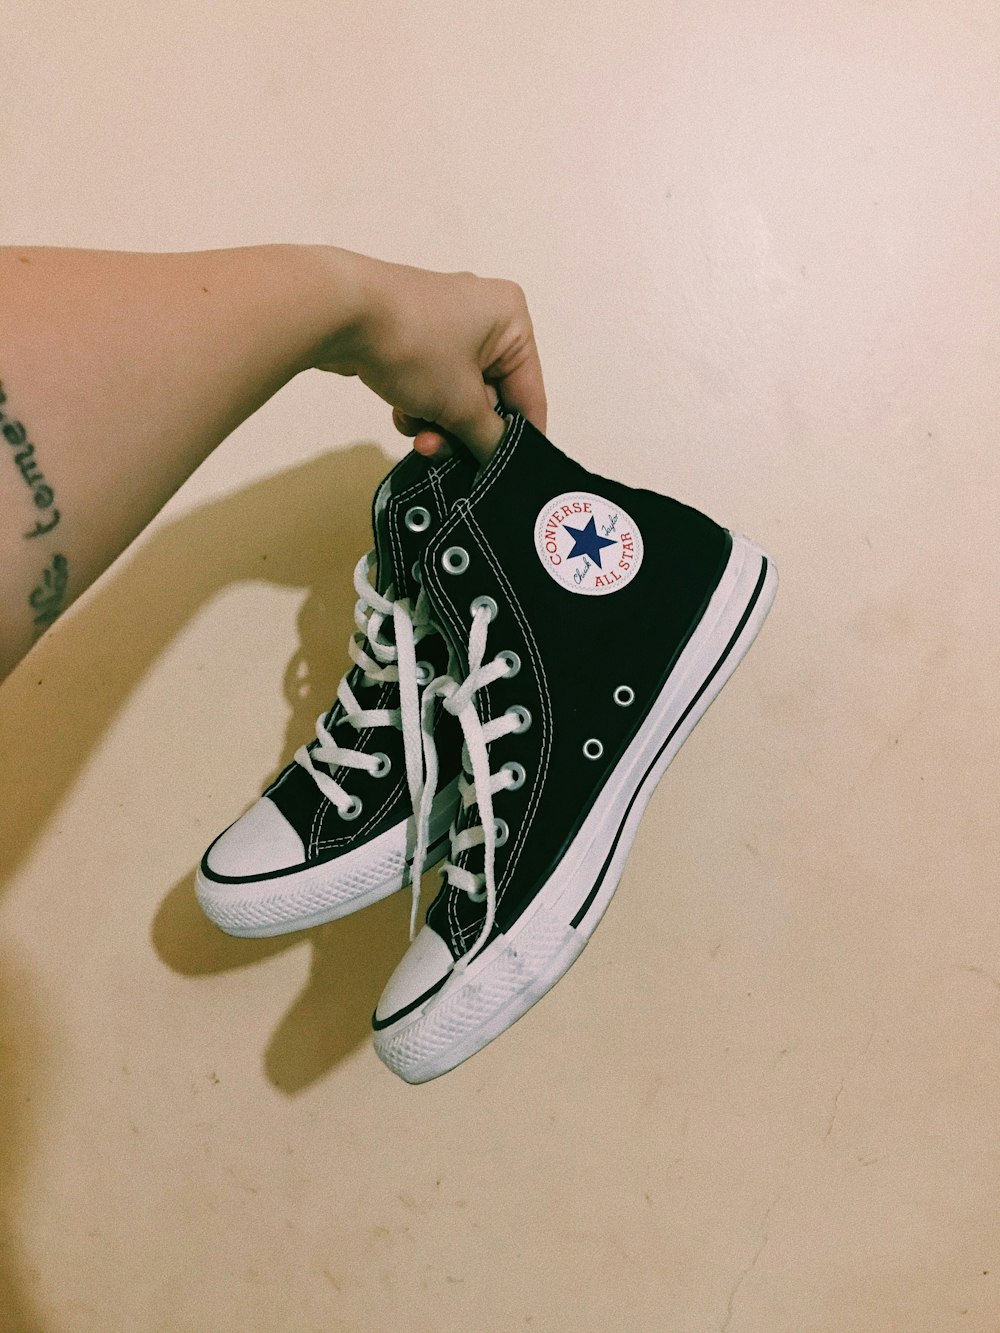 person wearing black converse all star high top sneakers